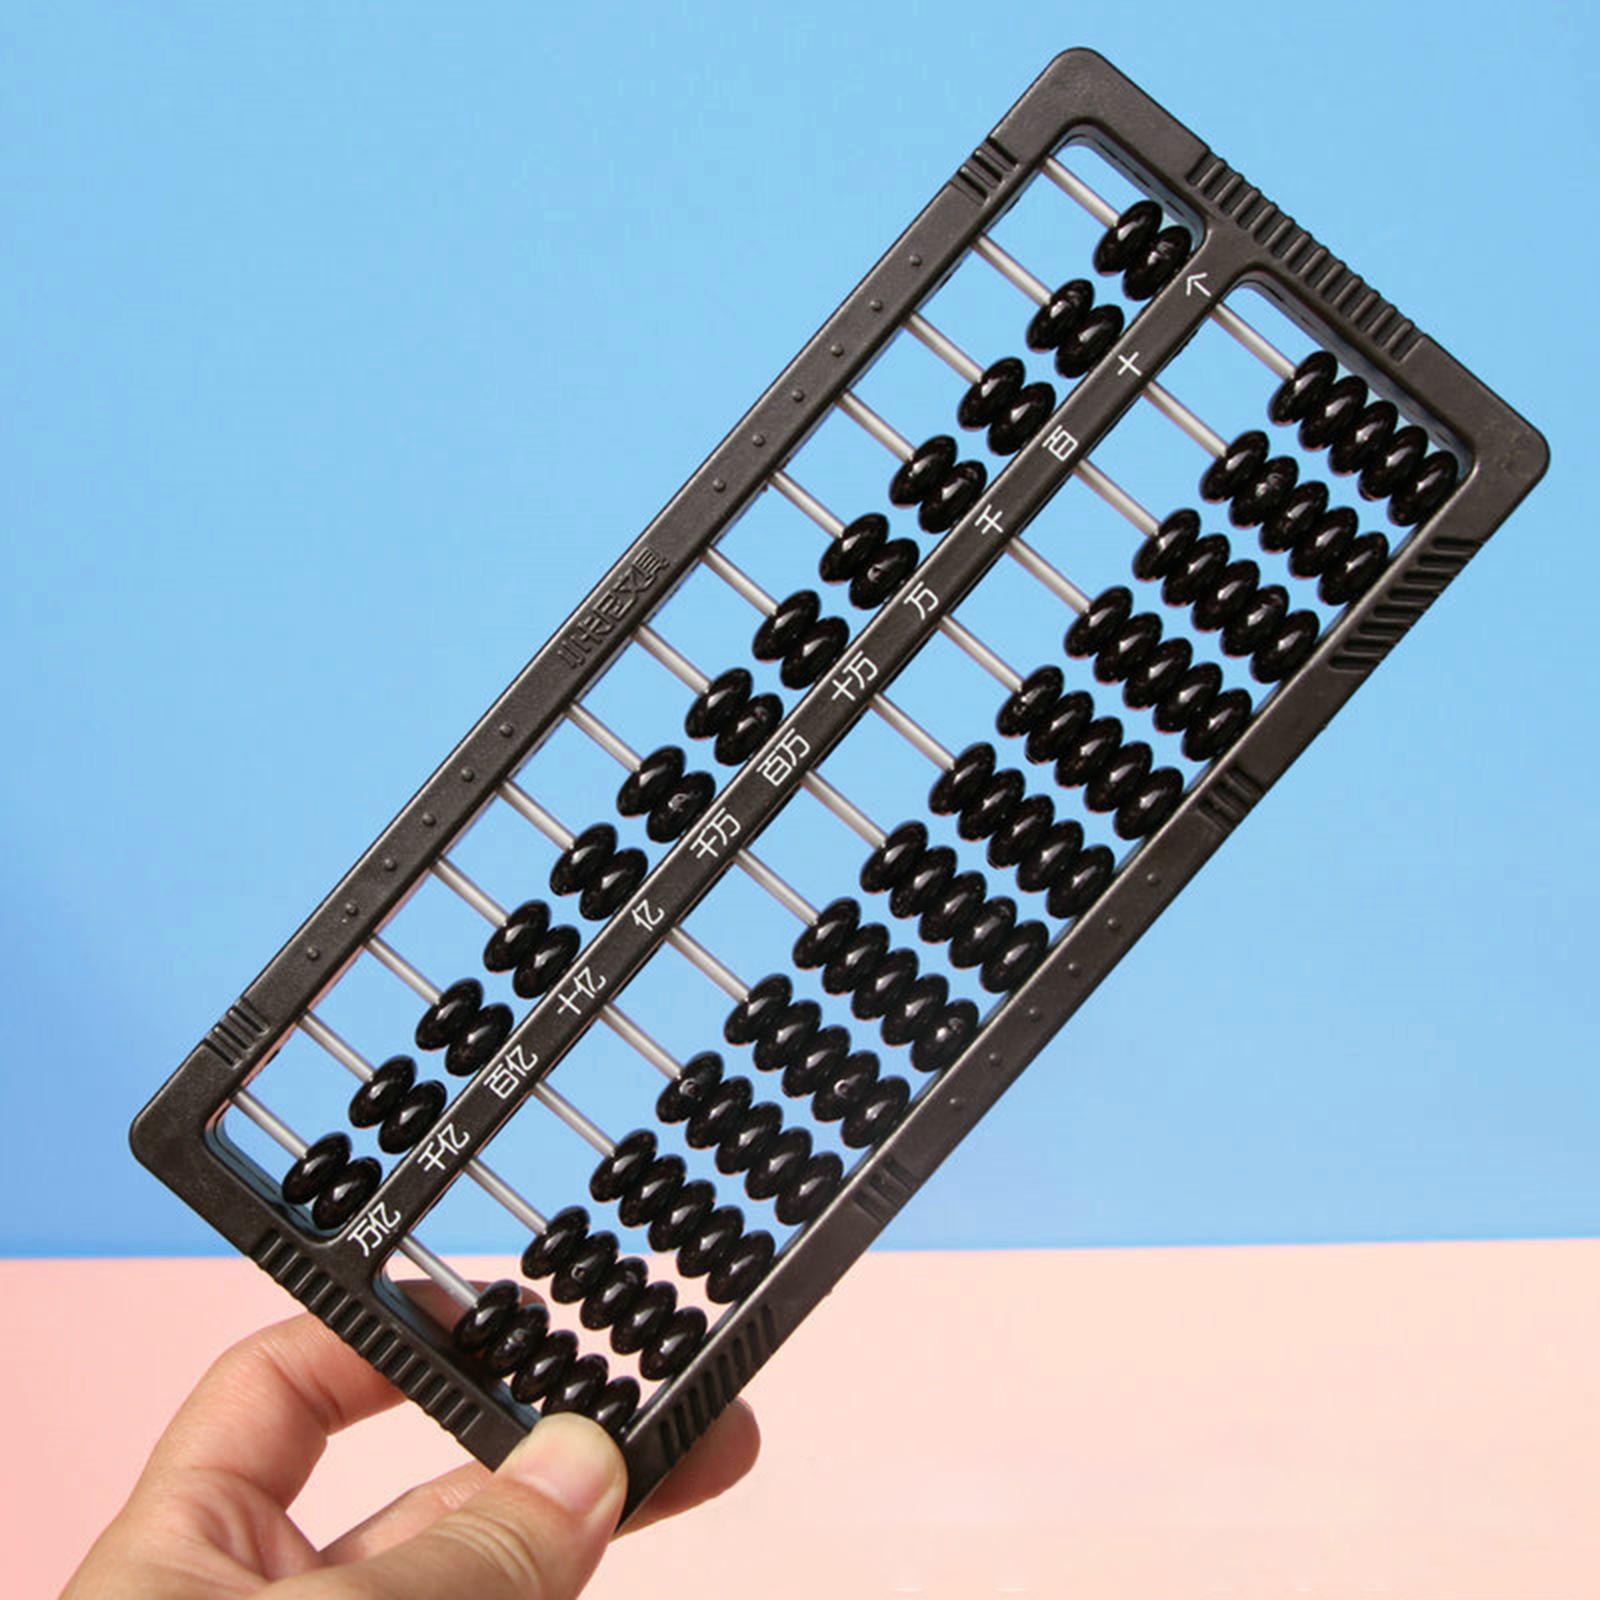 oshhni Digital Abacus Kids Calculator Abacus for Learning Addition Numbers